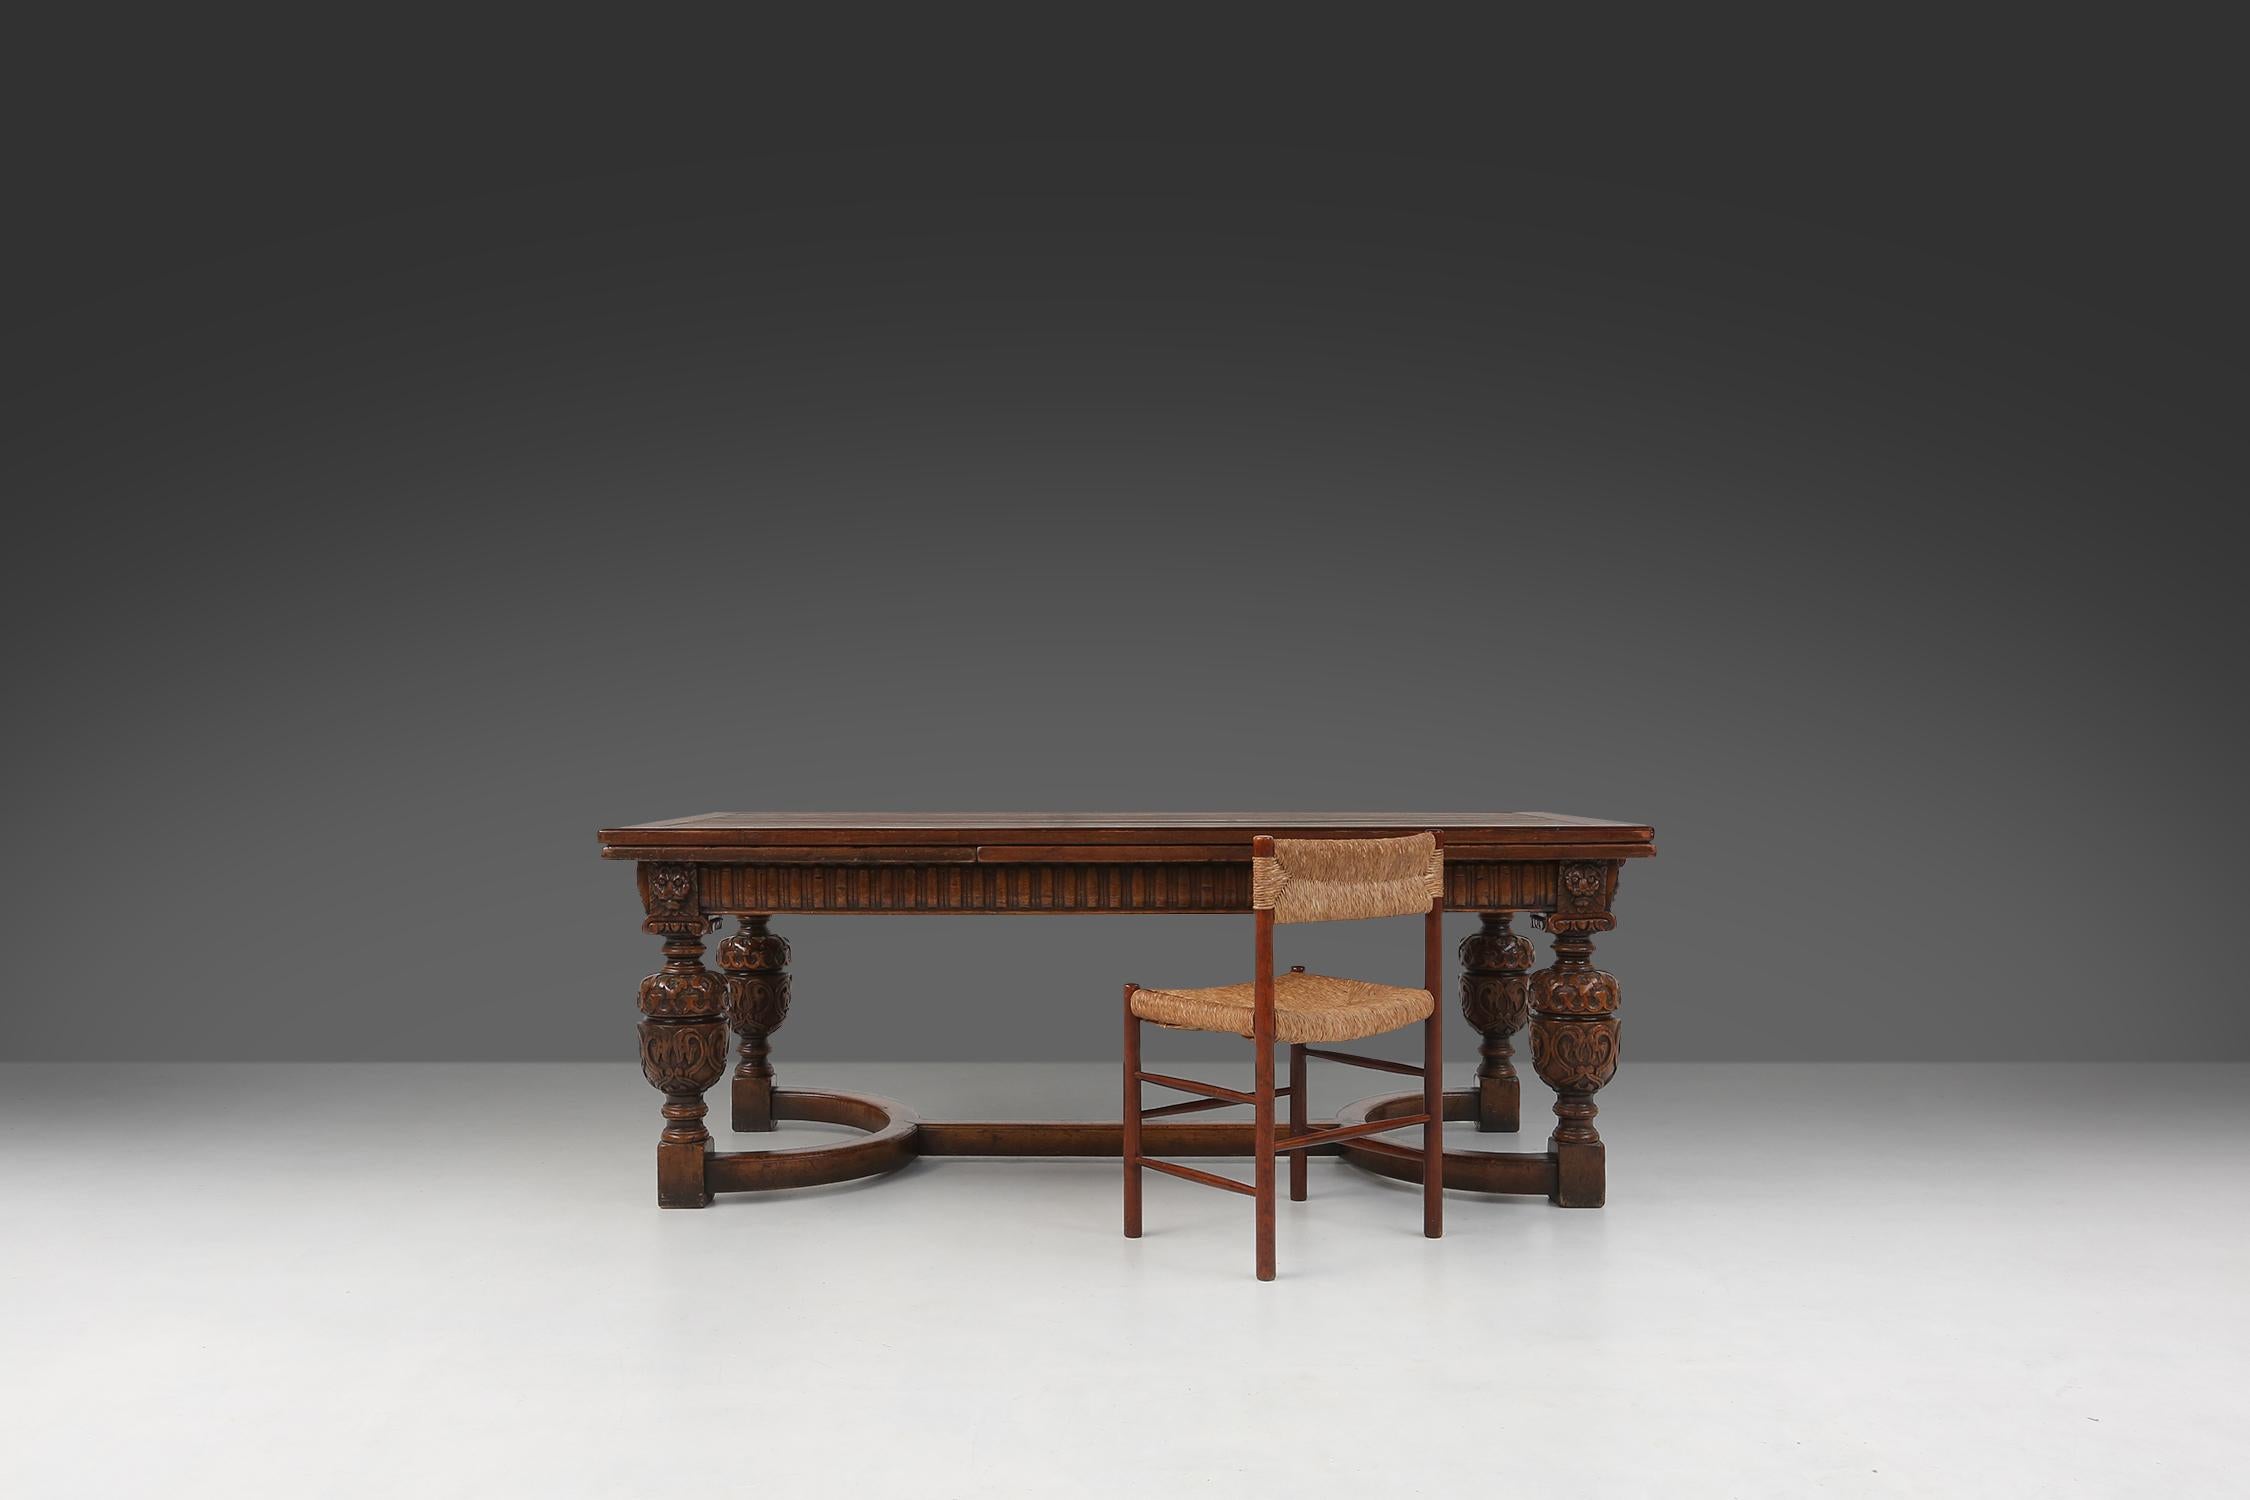 Flemish baroque 18th-century dining table in full oak. This beautiful table is decorated with lion heads and sculpted bulbous legs, testifying to the craftsmanship and style of Flemish cabinetmakers.

The four legs are connected by a crossbar, which